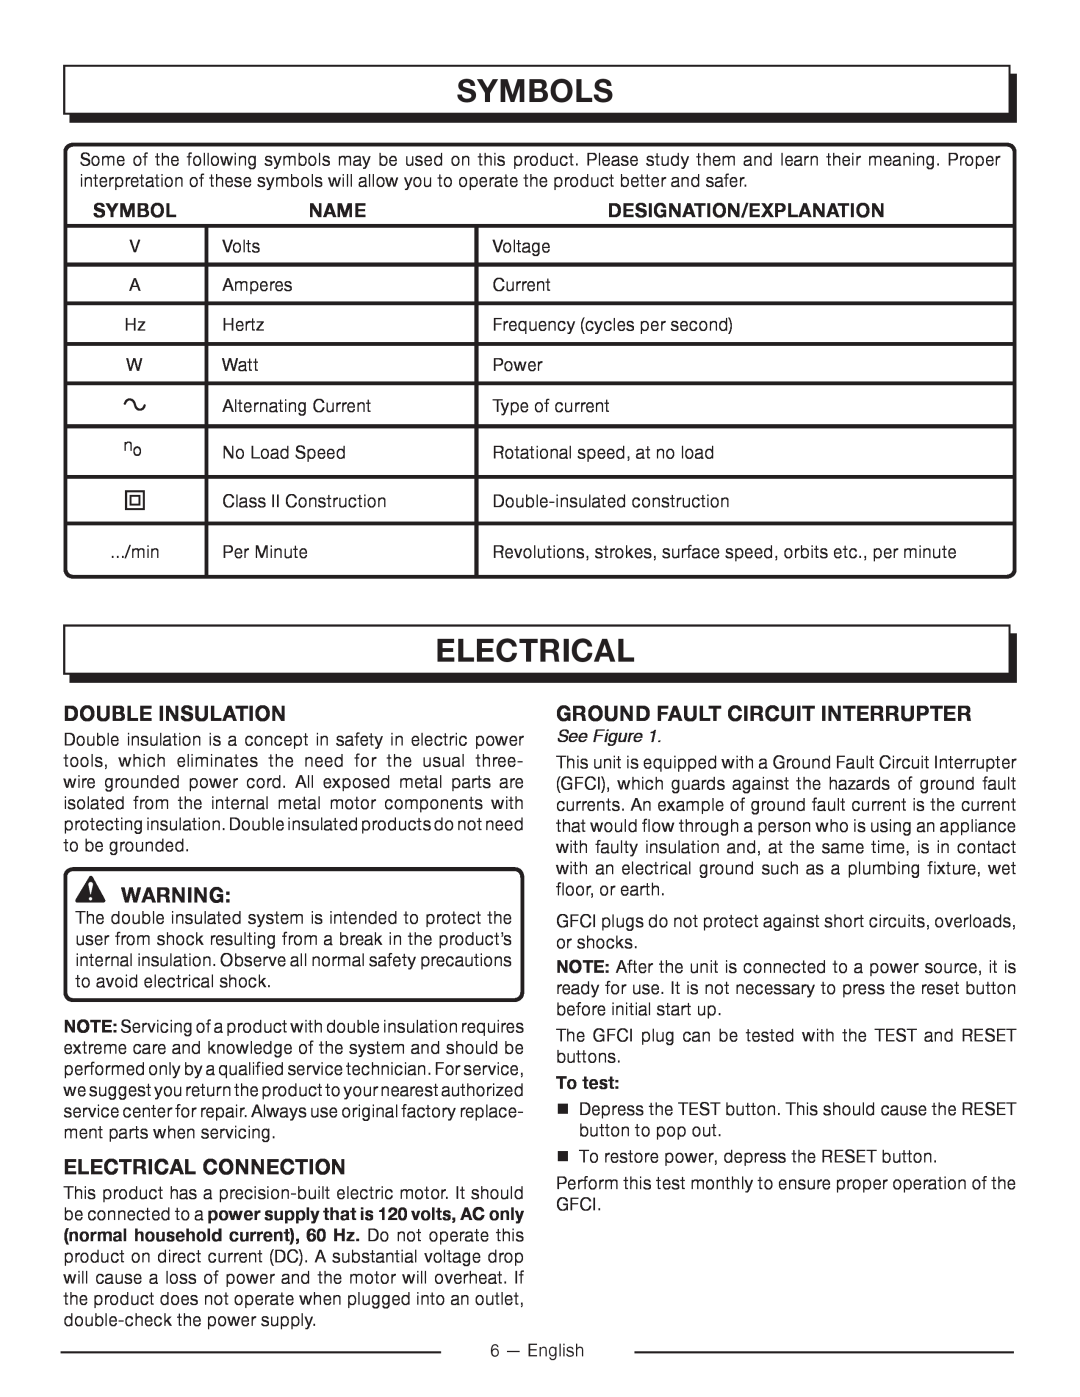 Homelite UT80715 Double Insulation, Electrical Connection, Ground Fault Circuit Interrupter, See Figure, To test, Name 